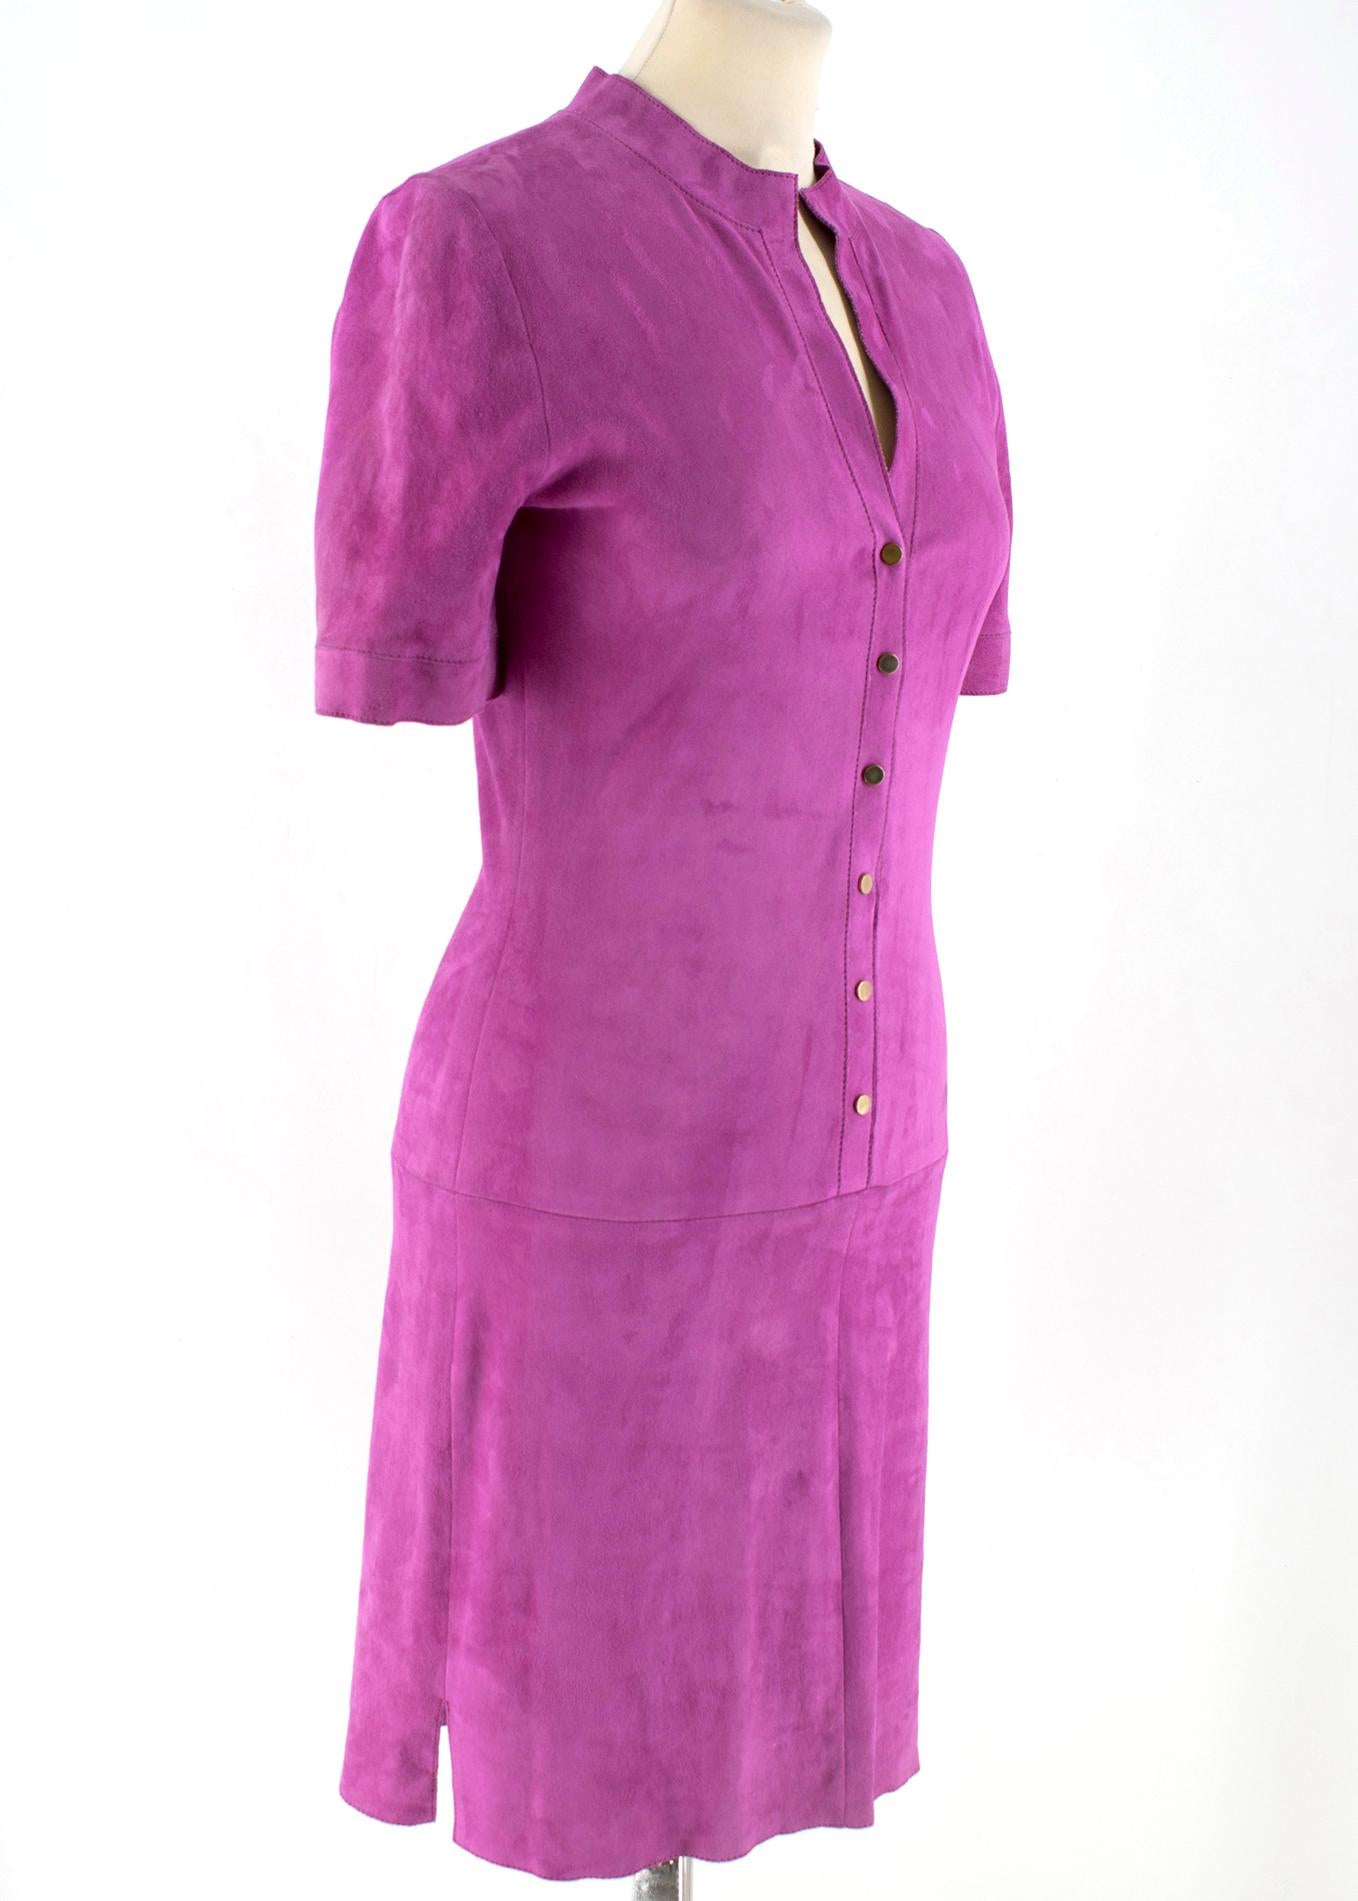 Short-sleeved magenta Velour dress from Jitrois. This 90 cm dress features a beautifully mandarin collar neckline, a delicate capped sleeve with button closure and a statement exposed zip placed strategically down the back centre seam.

- 100%